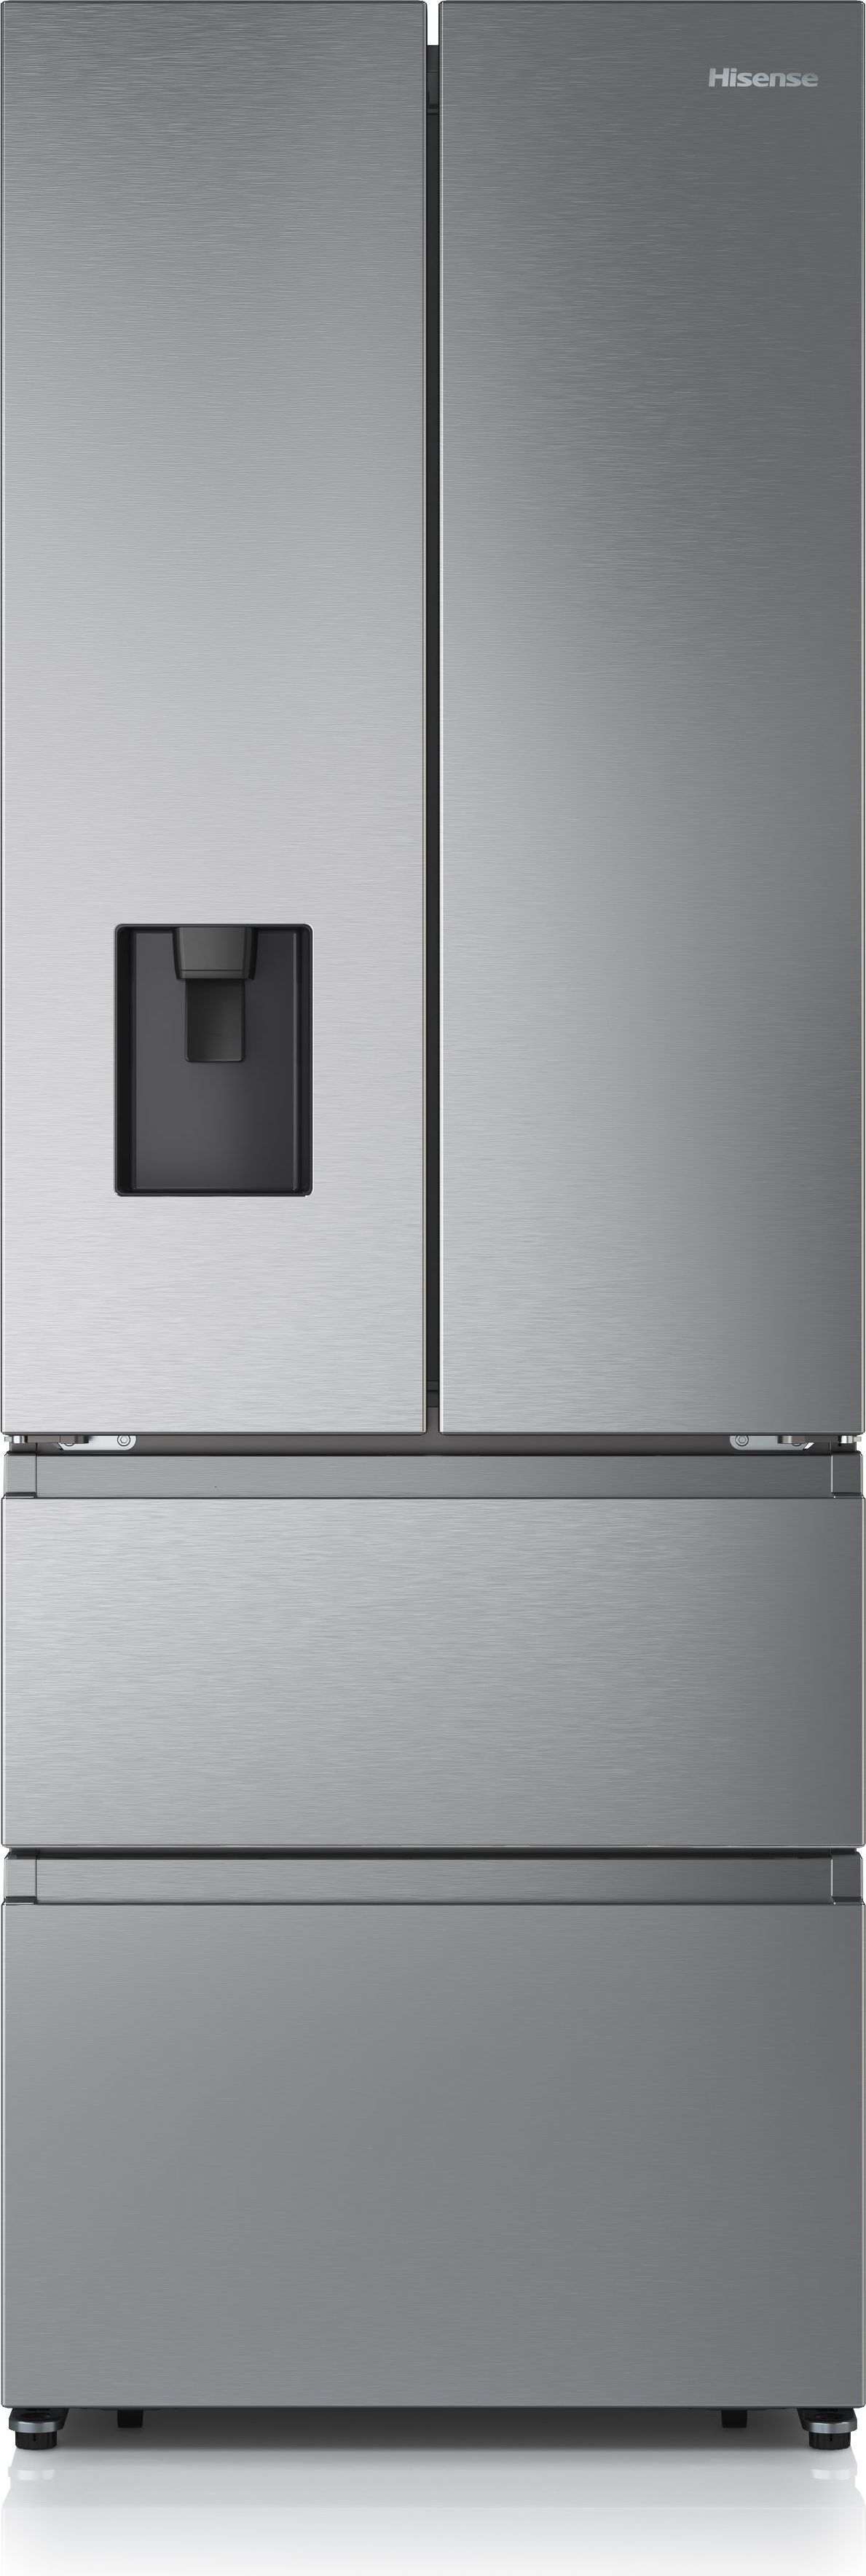 Hisense PureFlat RF632N4WIE Total No Frost American Fridge Freezer - Stainless Steel - E Rated, Stainless Steel